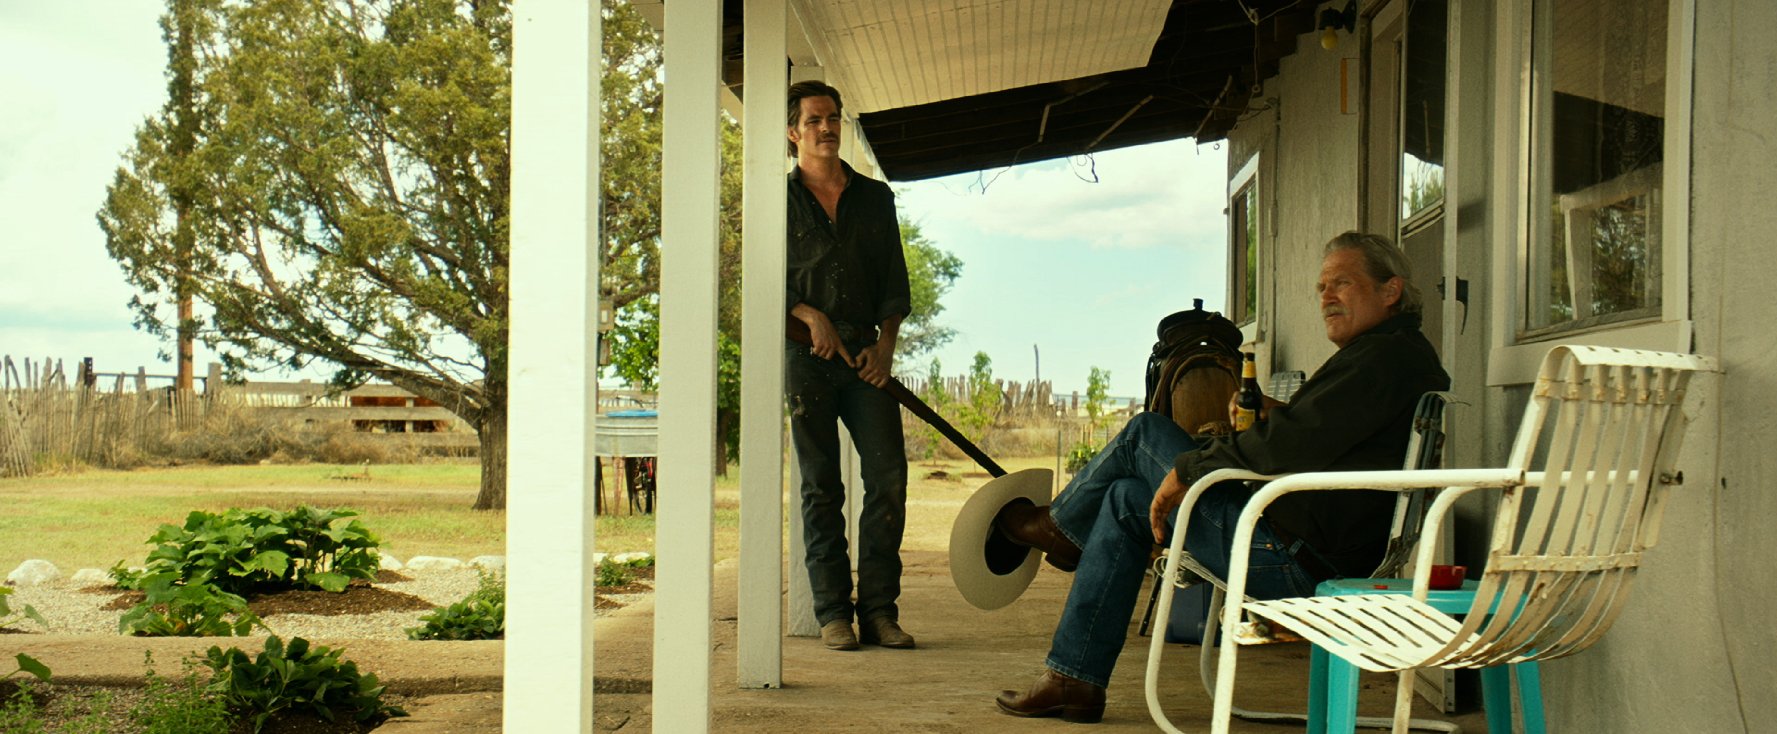 Hell or High Water Blu-ray review